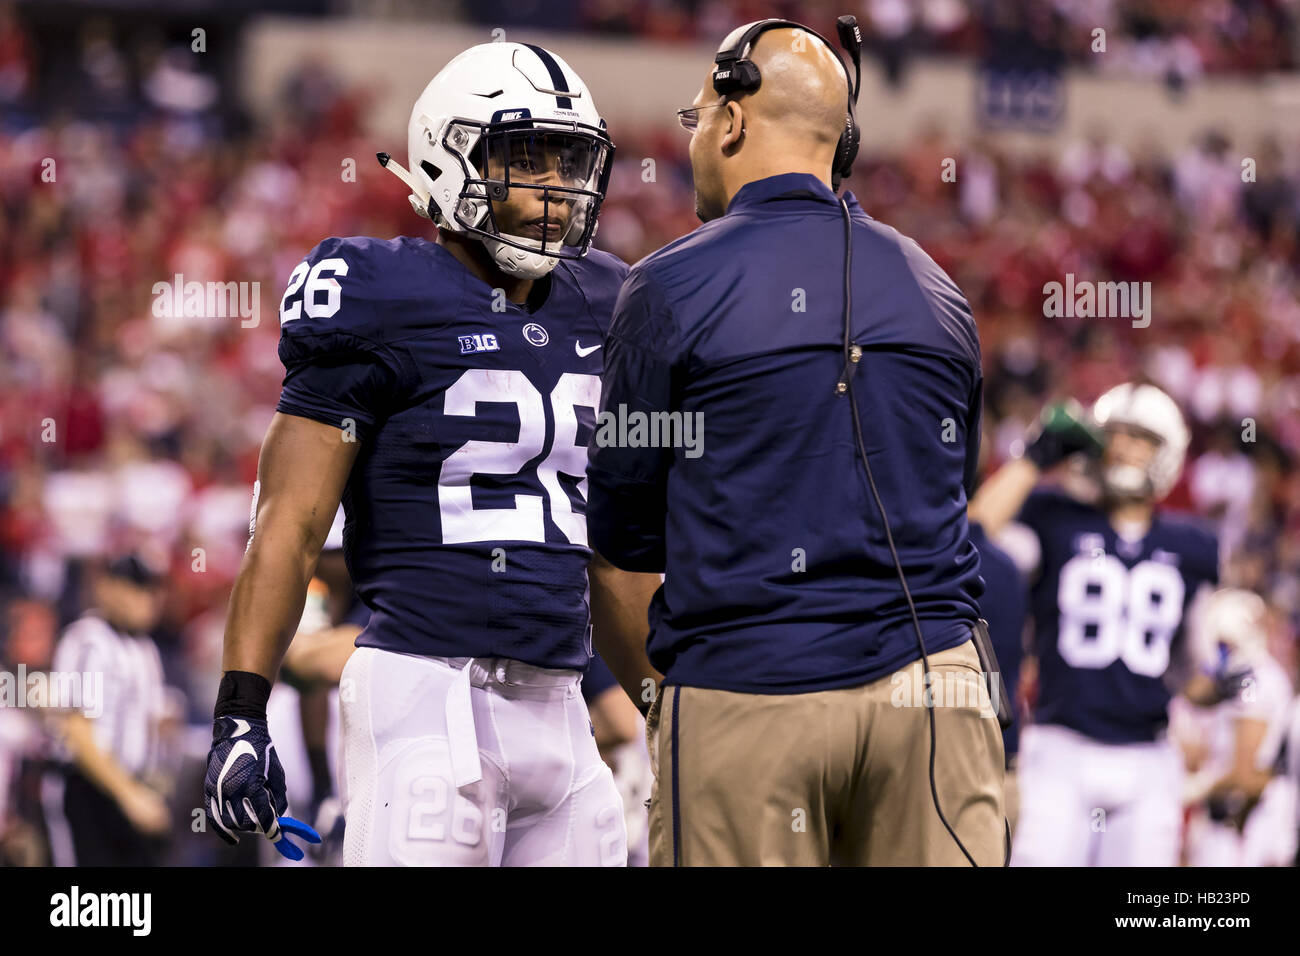 December 3, 2016 - Indianapolis, Indiana, U.S - December 3, 2016 - Indianapolis, Indiana - Penn State Nittany Lions head coach James Franklin talks to Penn State Nittany Lions running back Saquon Barkley (26) in the first half during the Big Ten Championship game between Penn State Nittany Lions and Wisconsin Badgers at Lucas Oil Stadium. (Credit Image: © Scott Taetsch via ZUMA Wire) Stock Photo